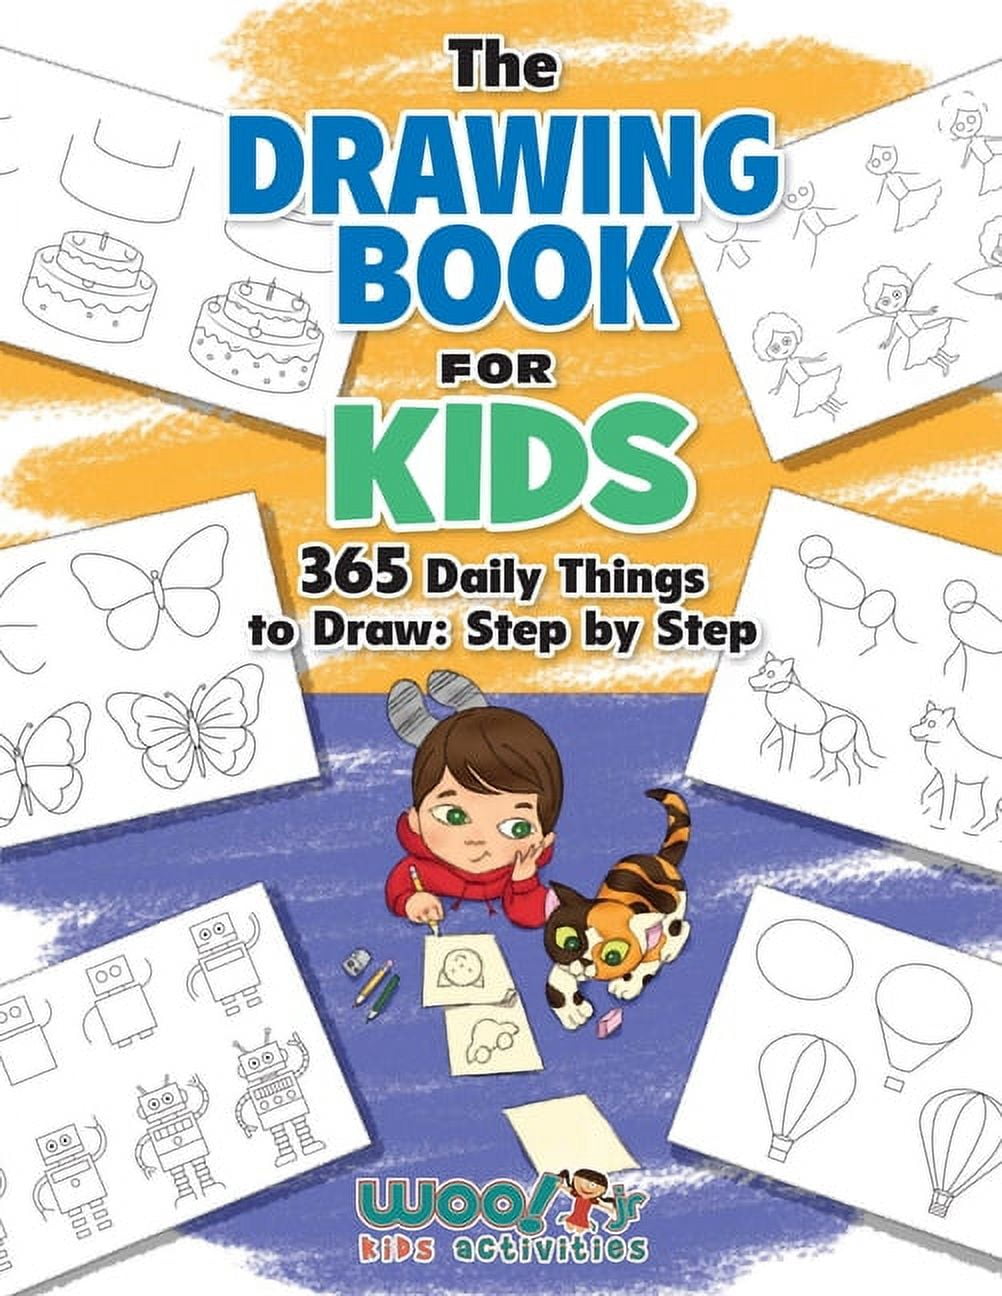 How to Draw a Book (Step by Step Pictures), Cool2bKids